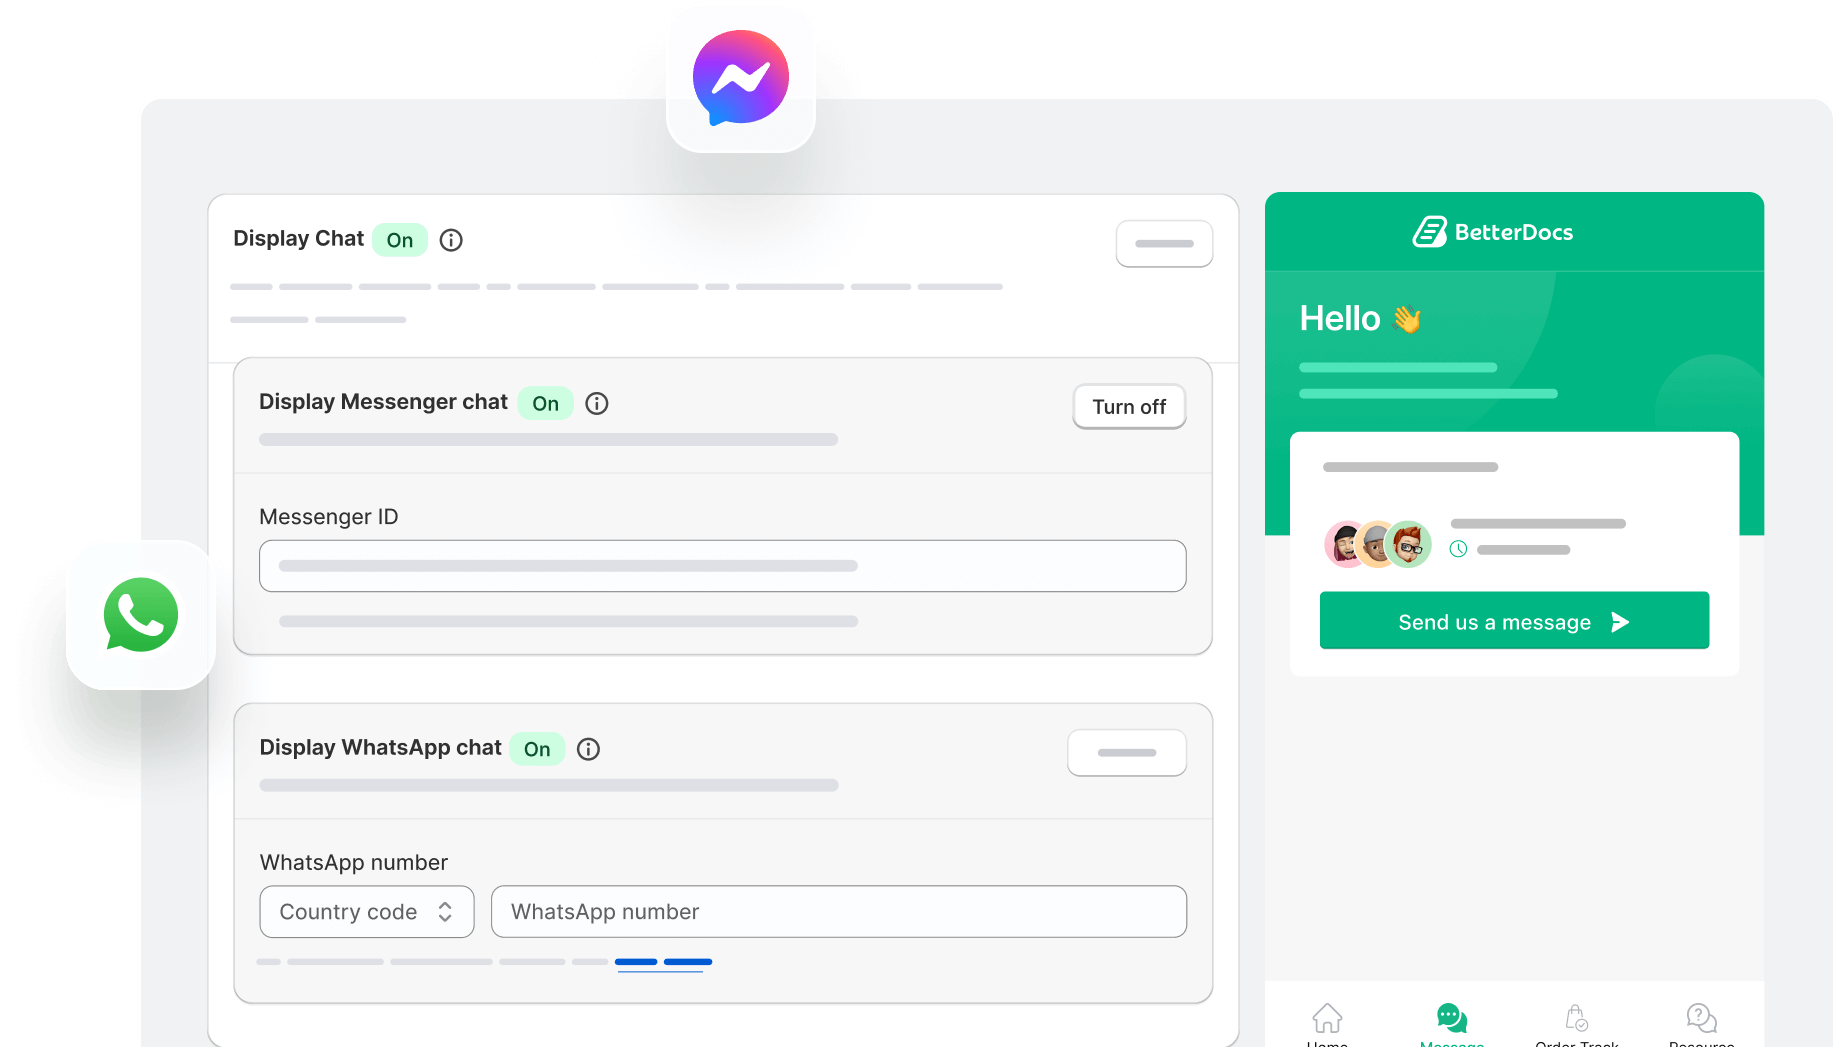 Powerful Integration With WhatsApp & Messenger